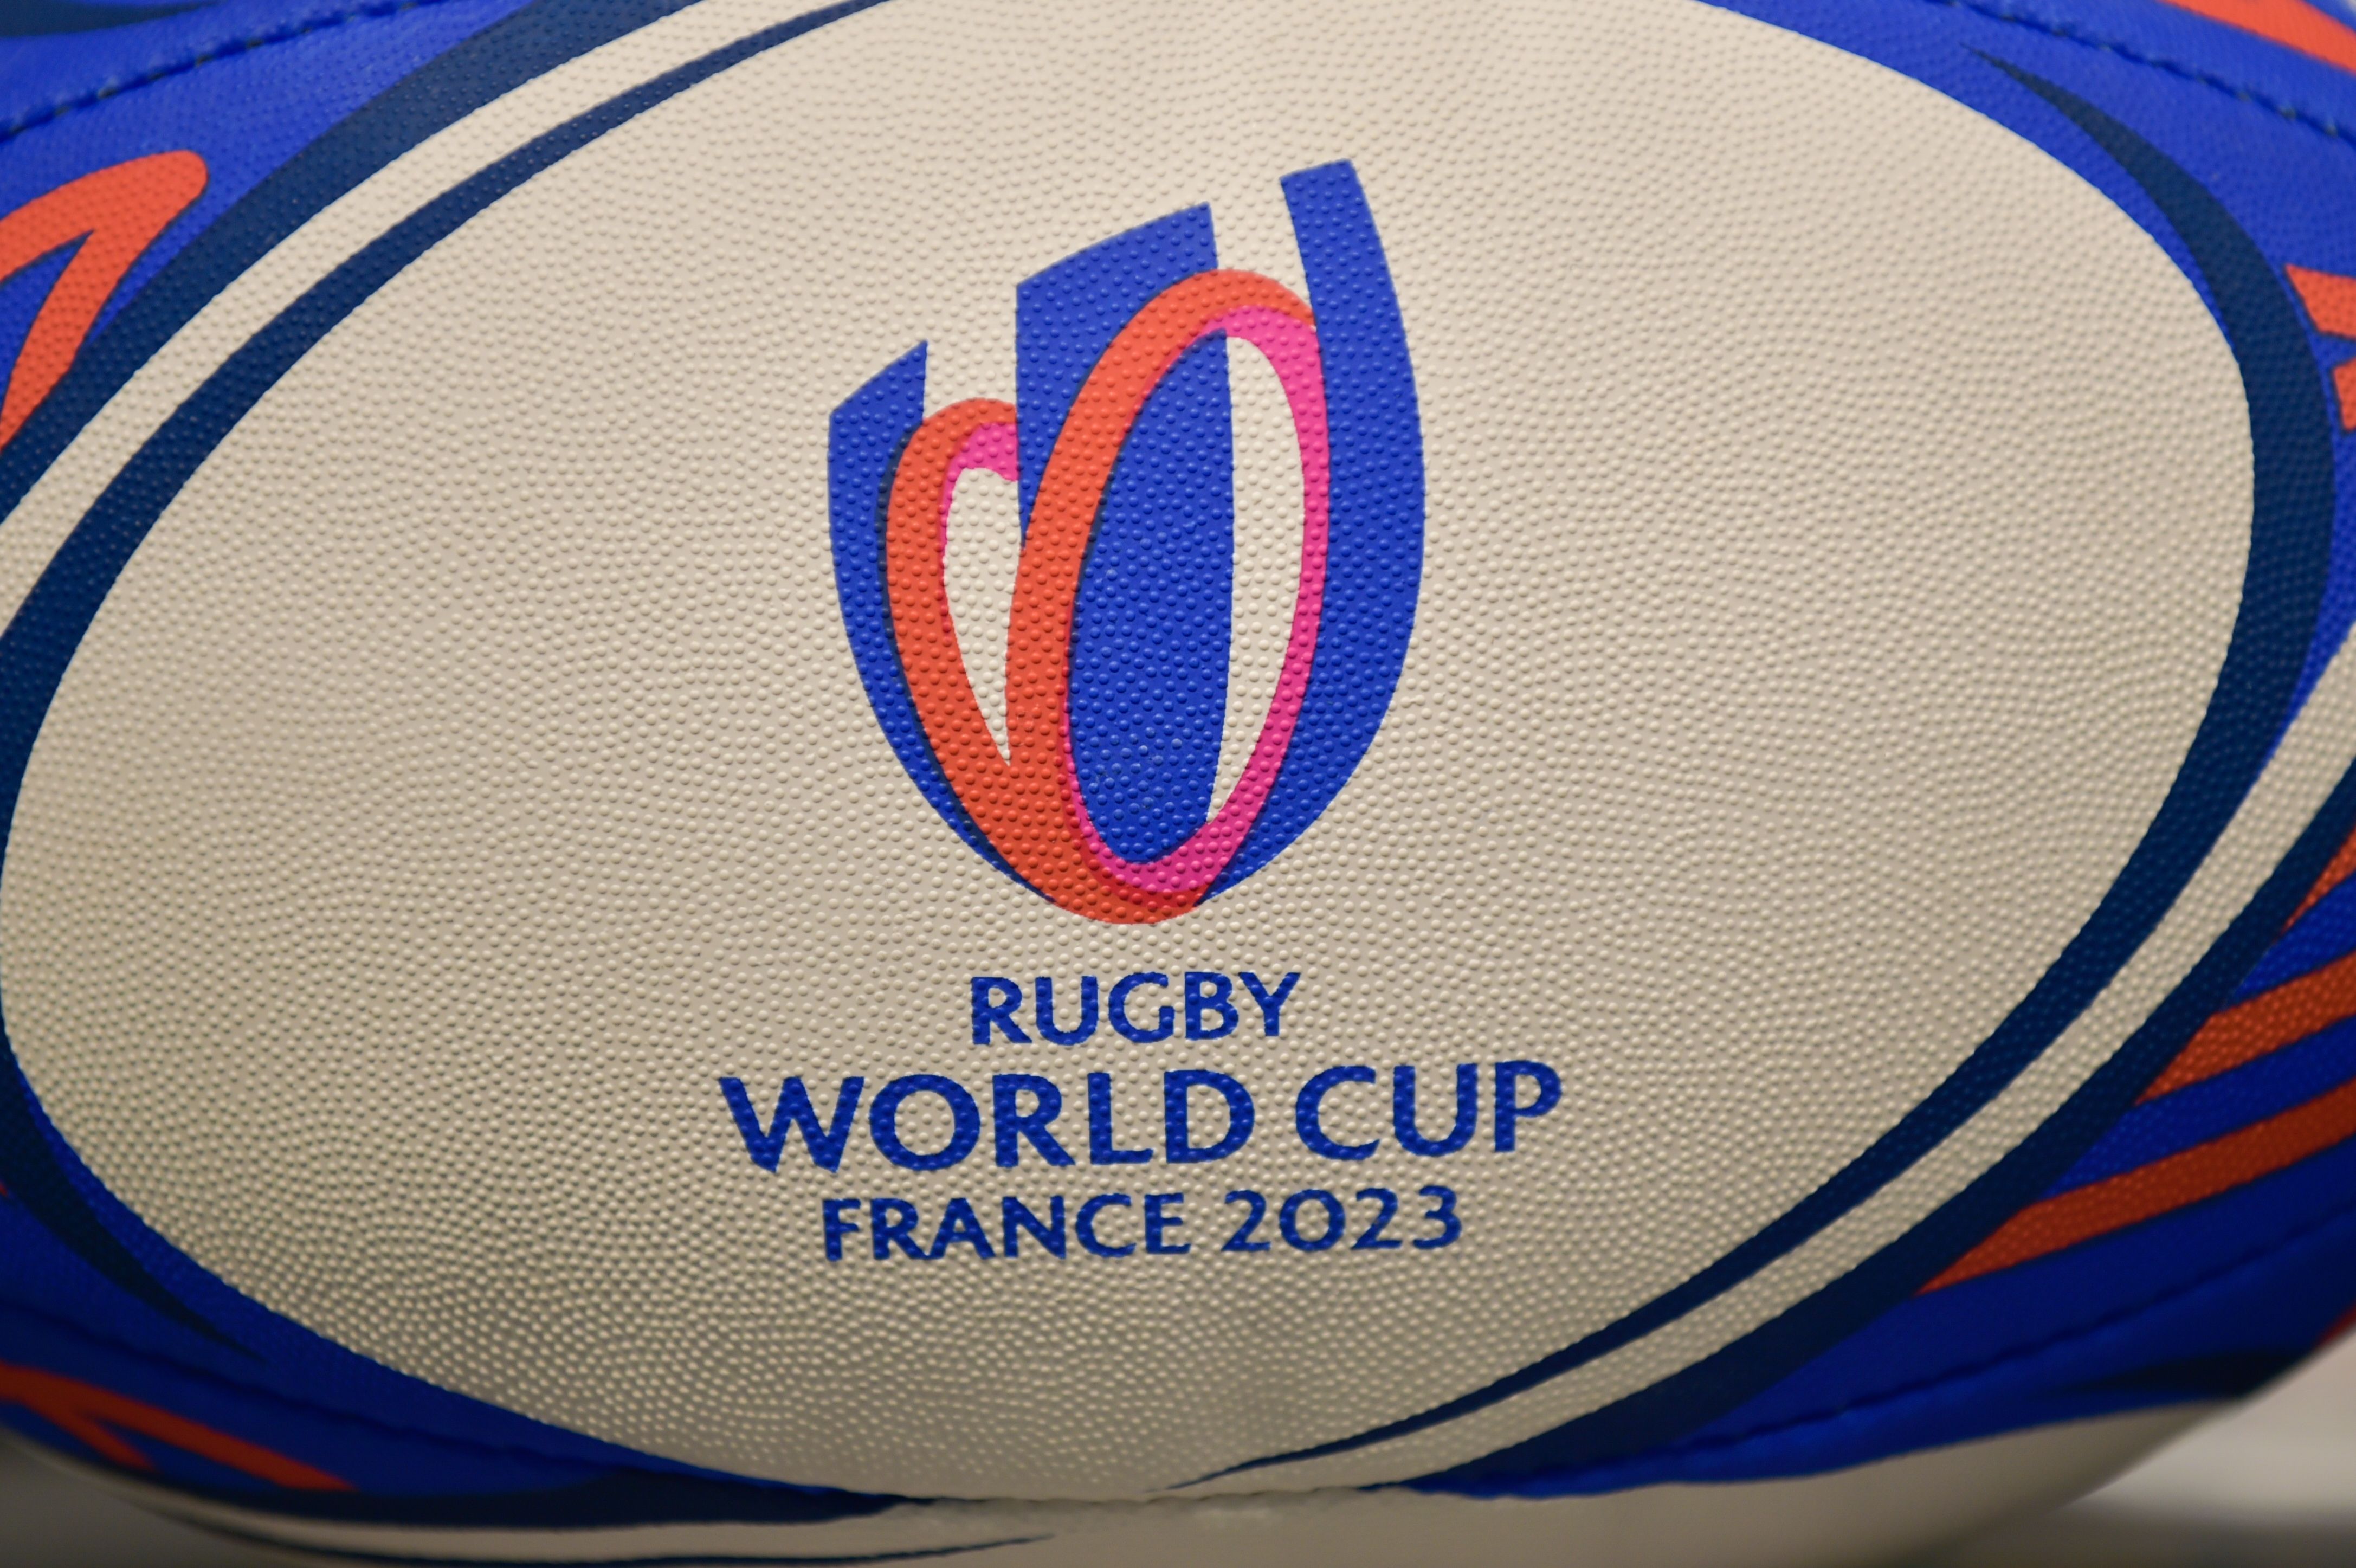 Rugby World Cup 2023 Predictions